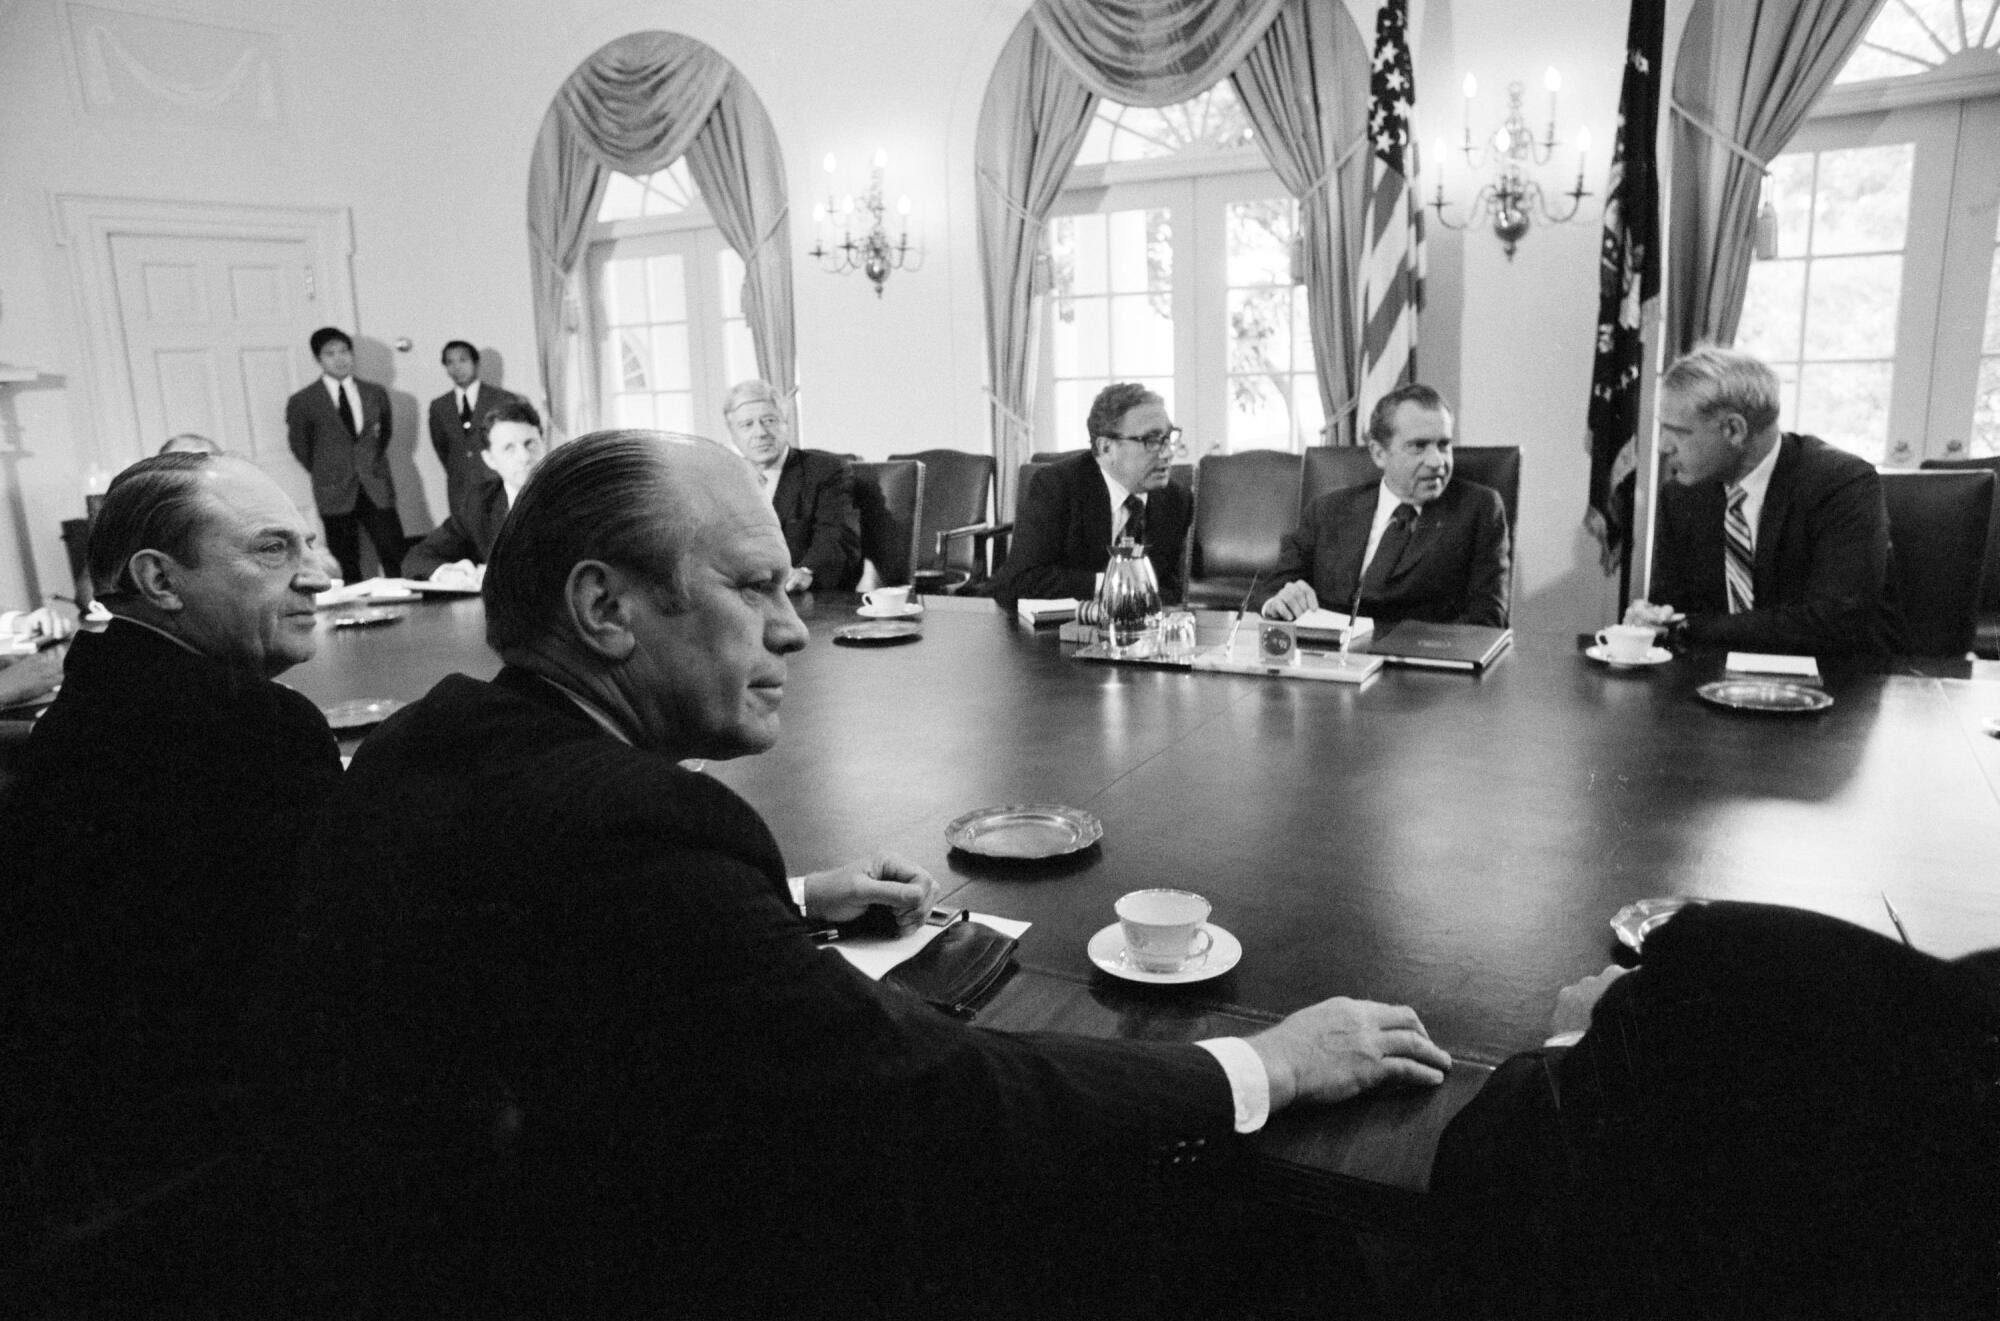 A black-and-white photo of officials at a table in an ornate room, Gerald Ford in the foreground across from Richard Nixon